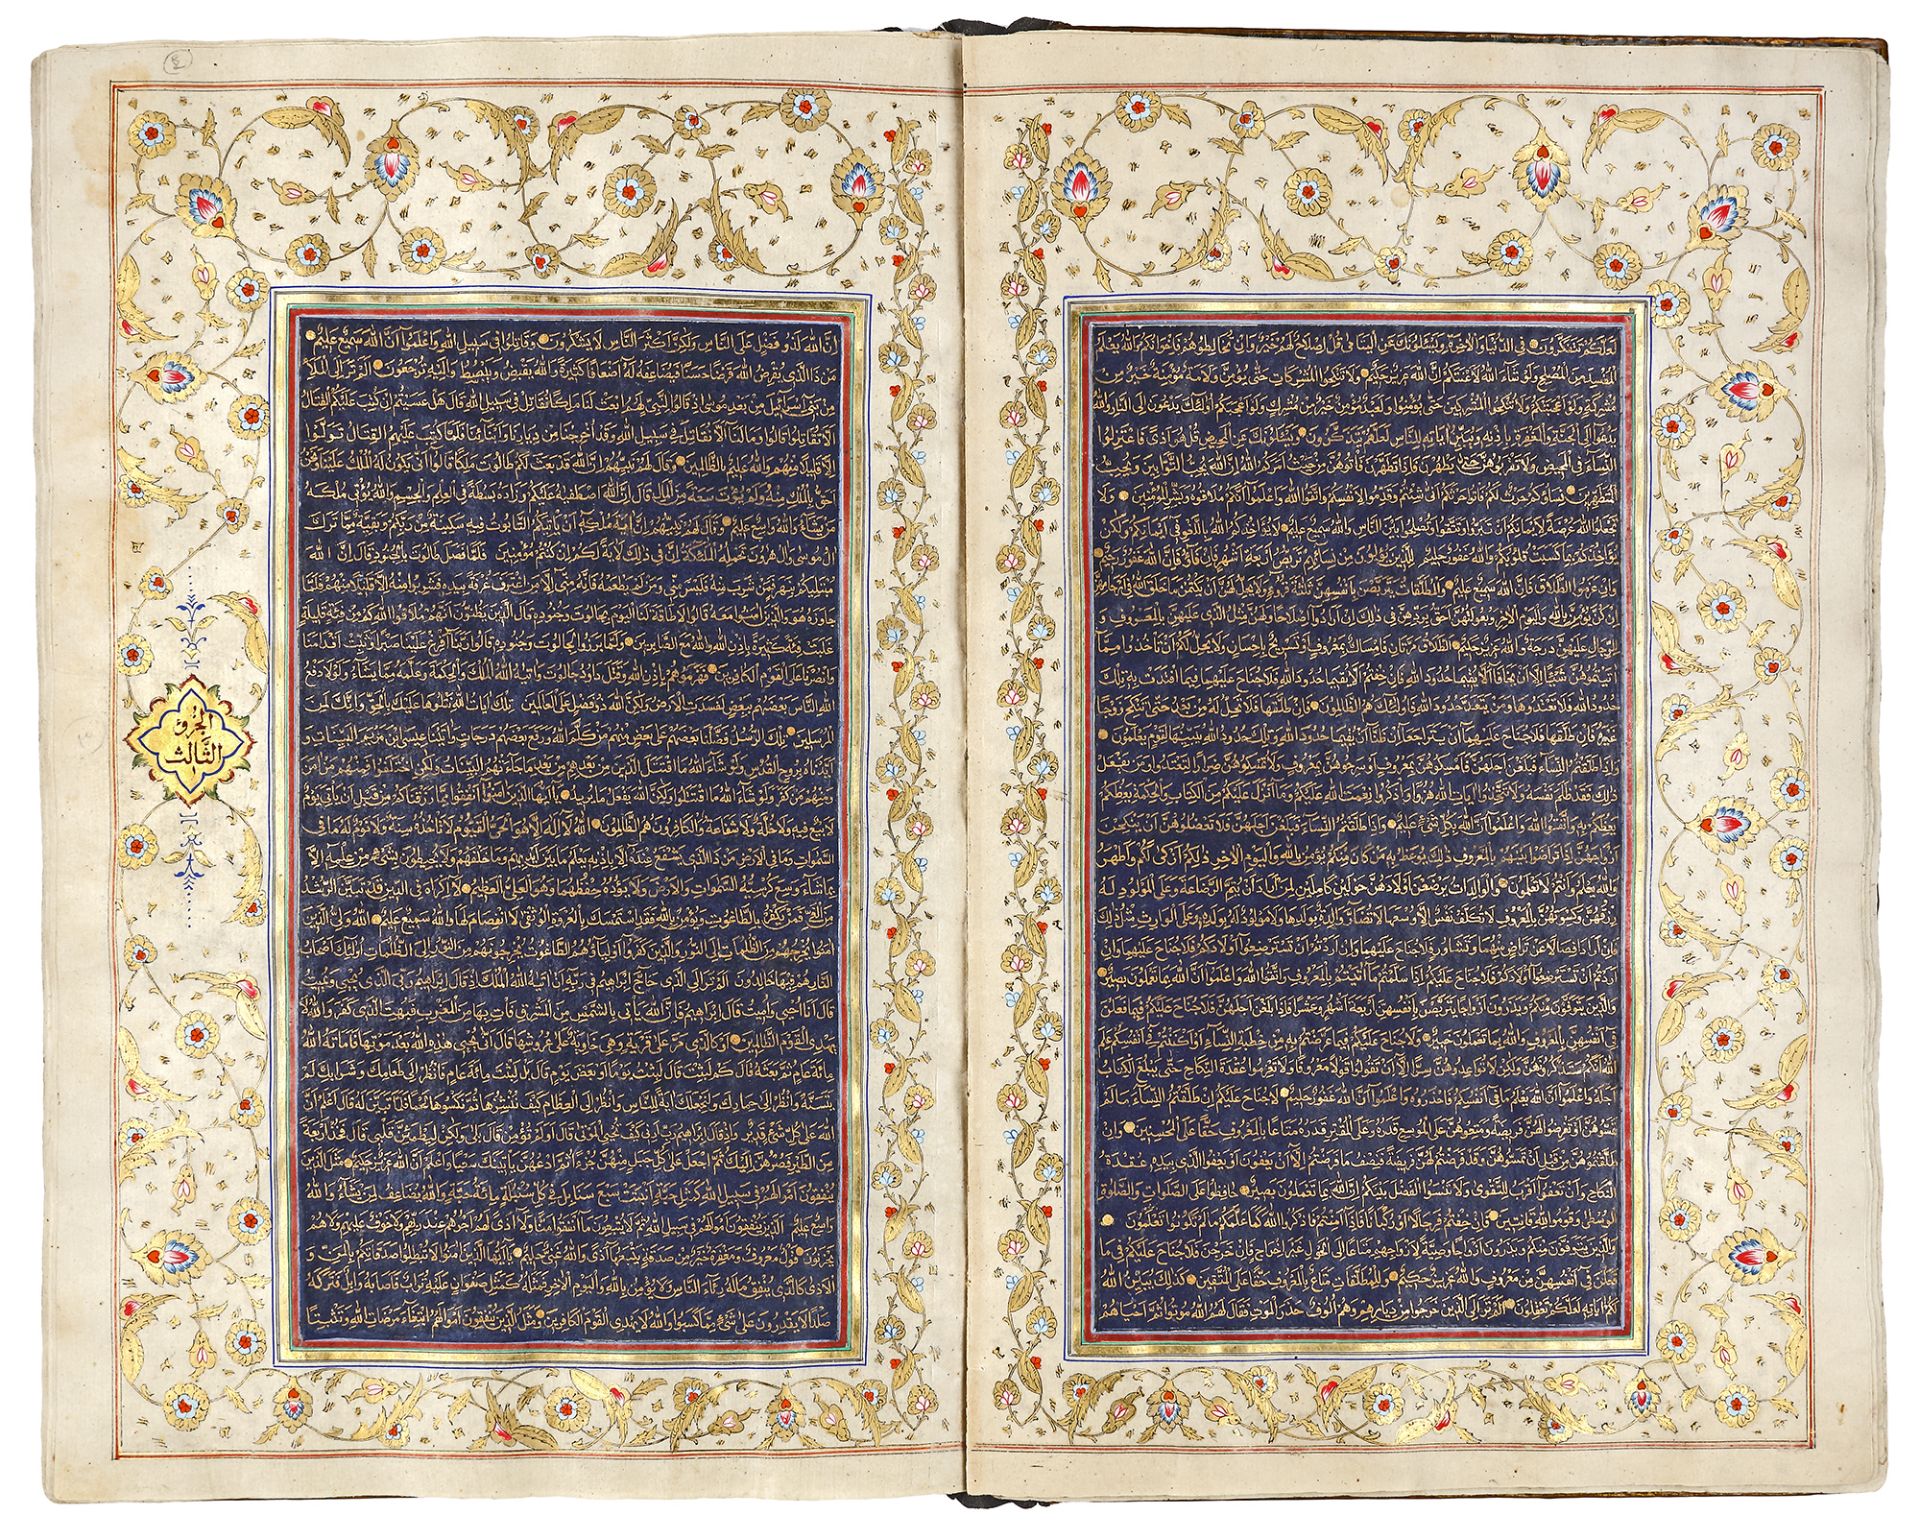 AN ILLUMINATED QURAN, PERSIA, LATE 19TH-EARLY 20TH CENTURY - Image 19 of 27